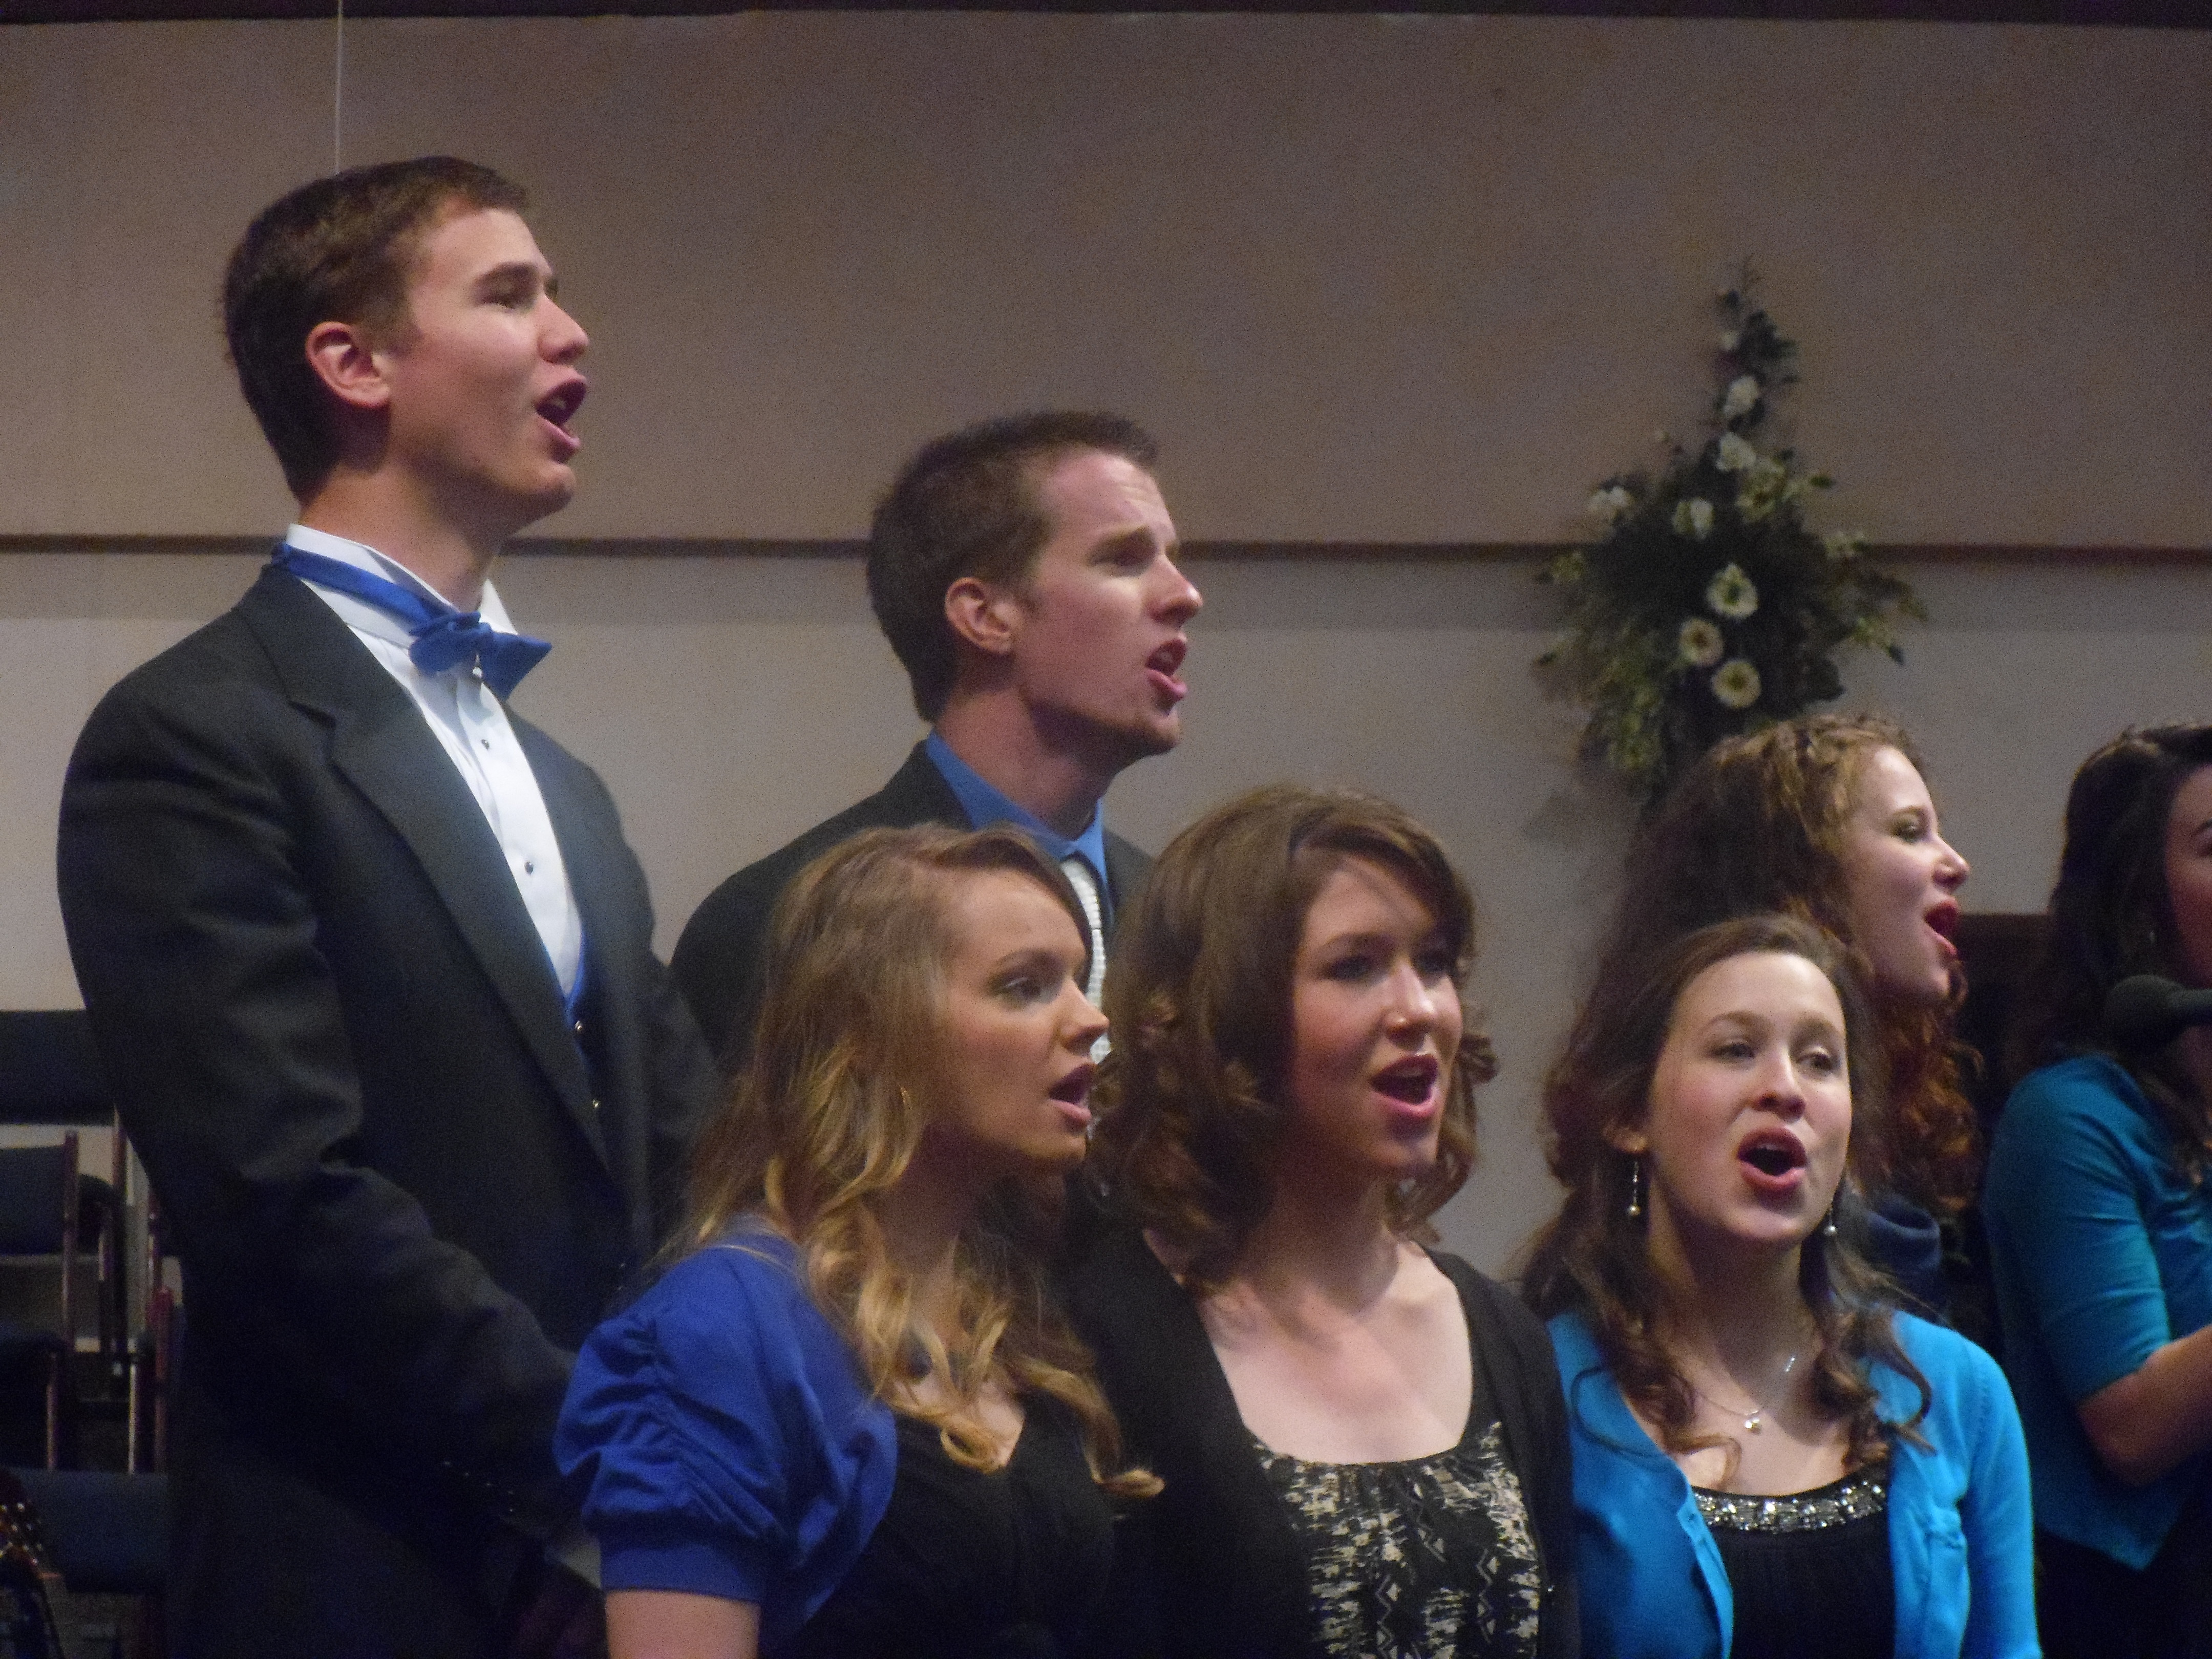 Hannah and friends singing during her graduation ceremony